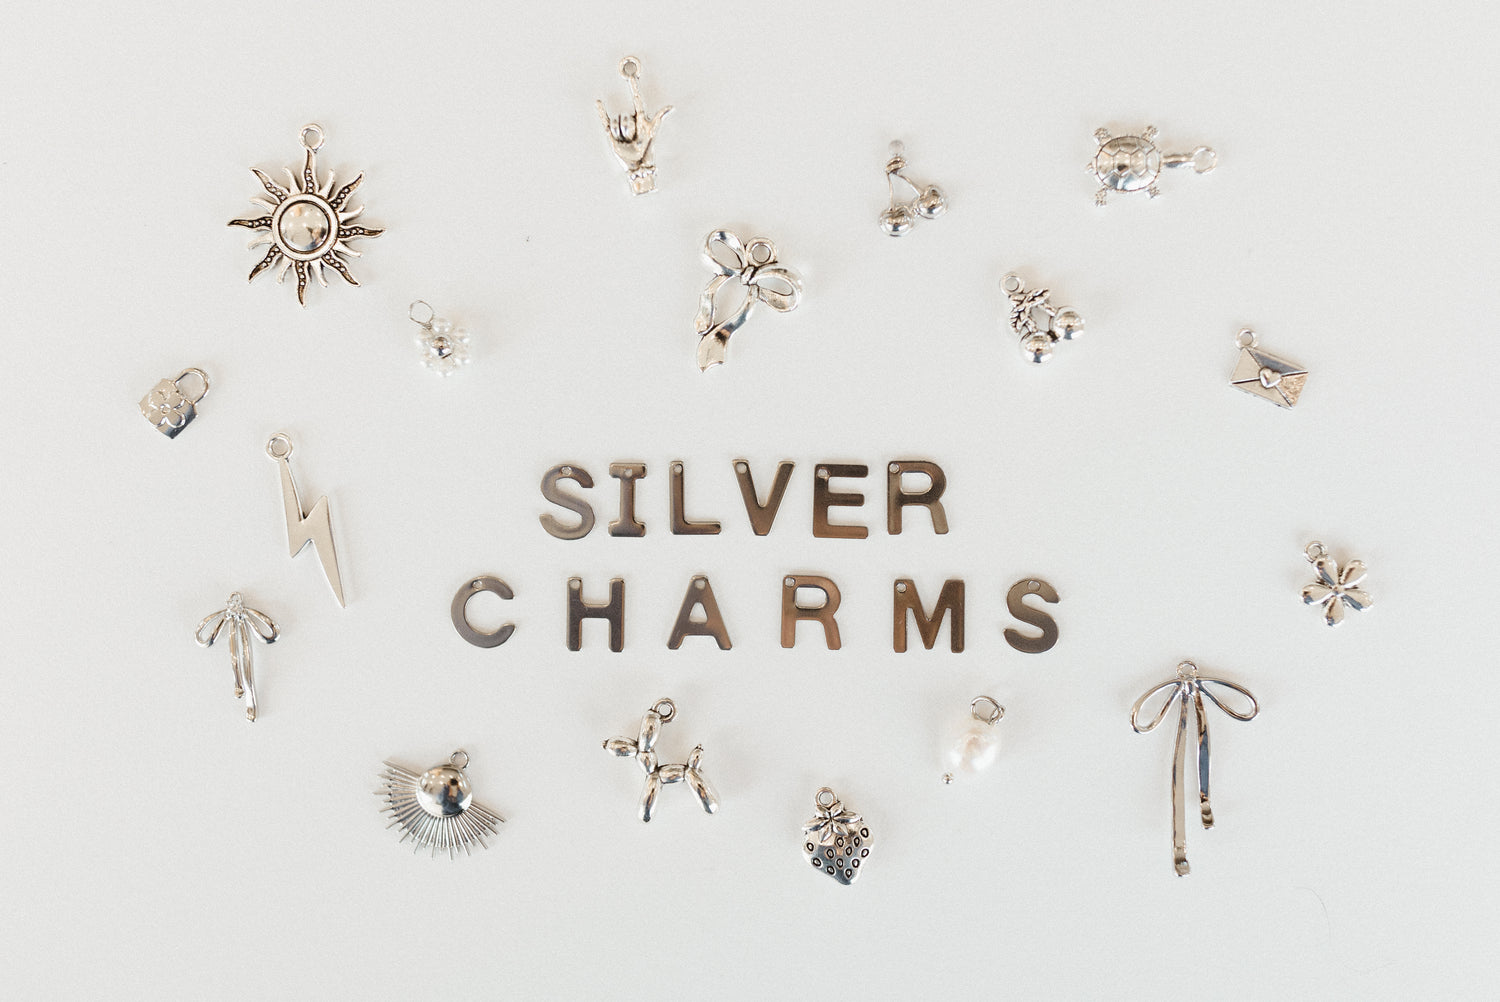 Silver charms